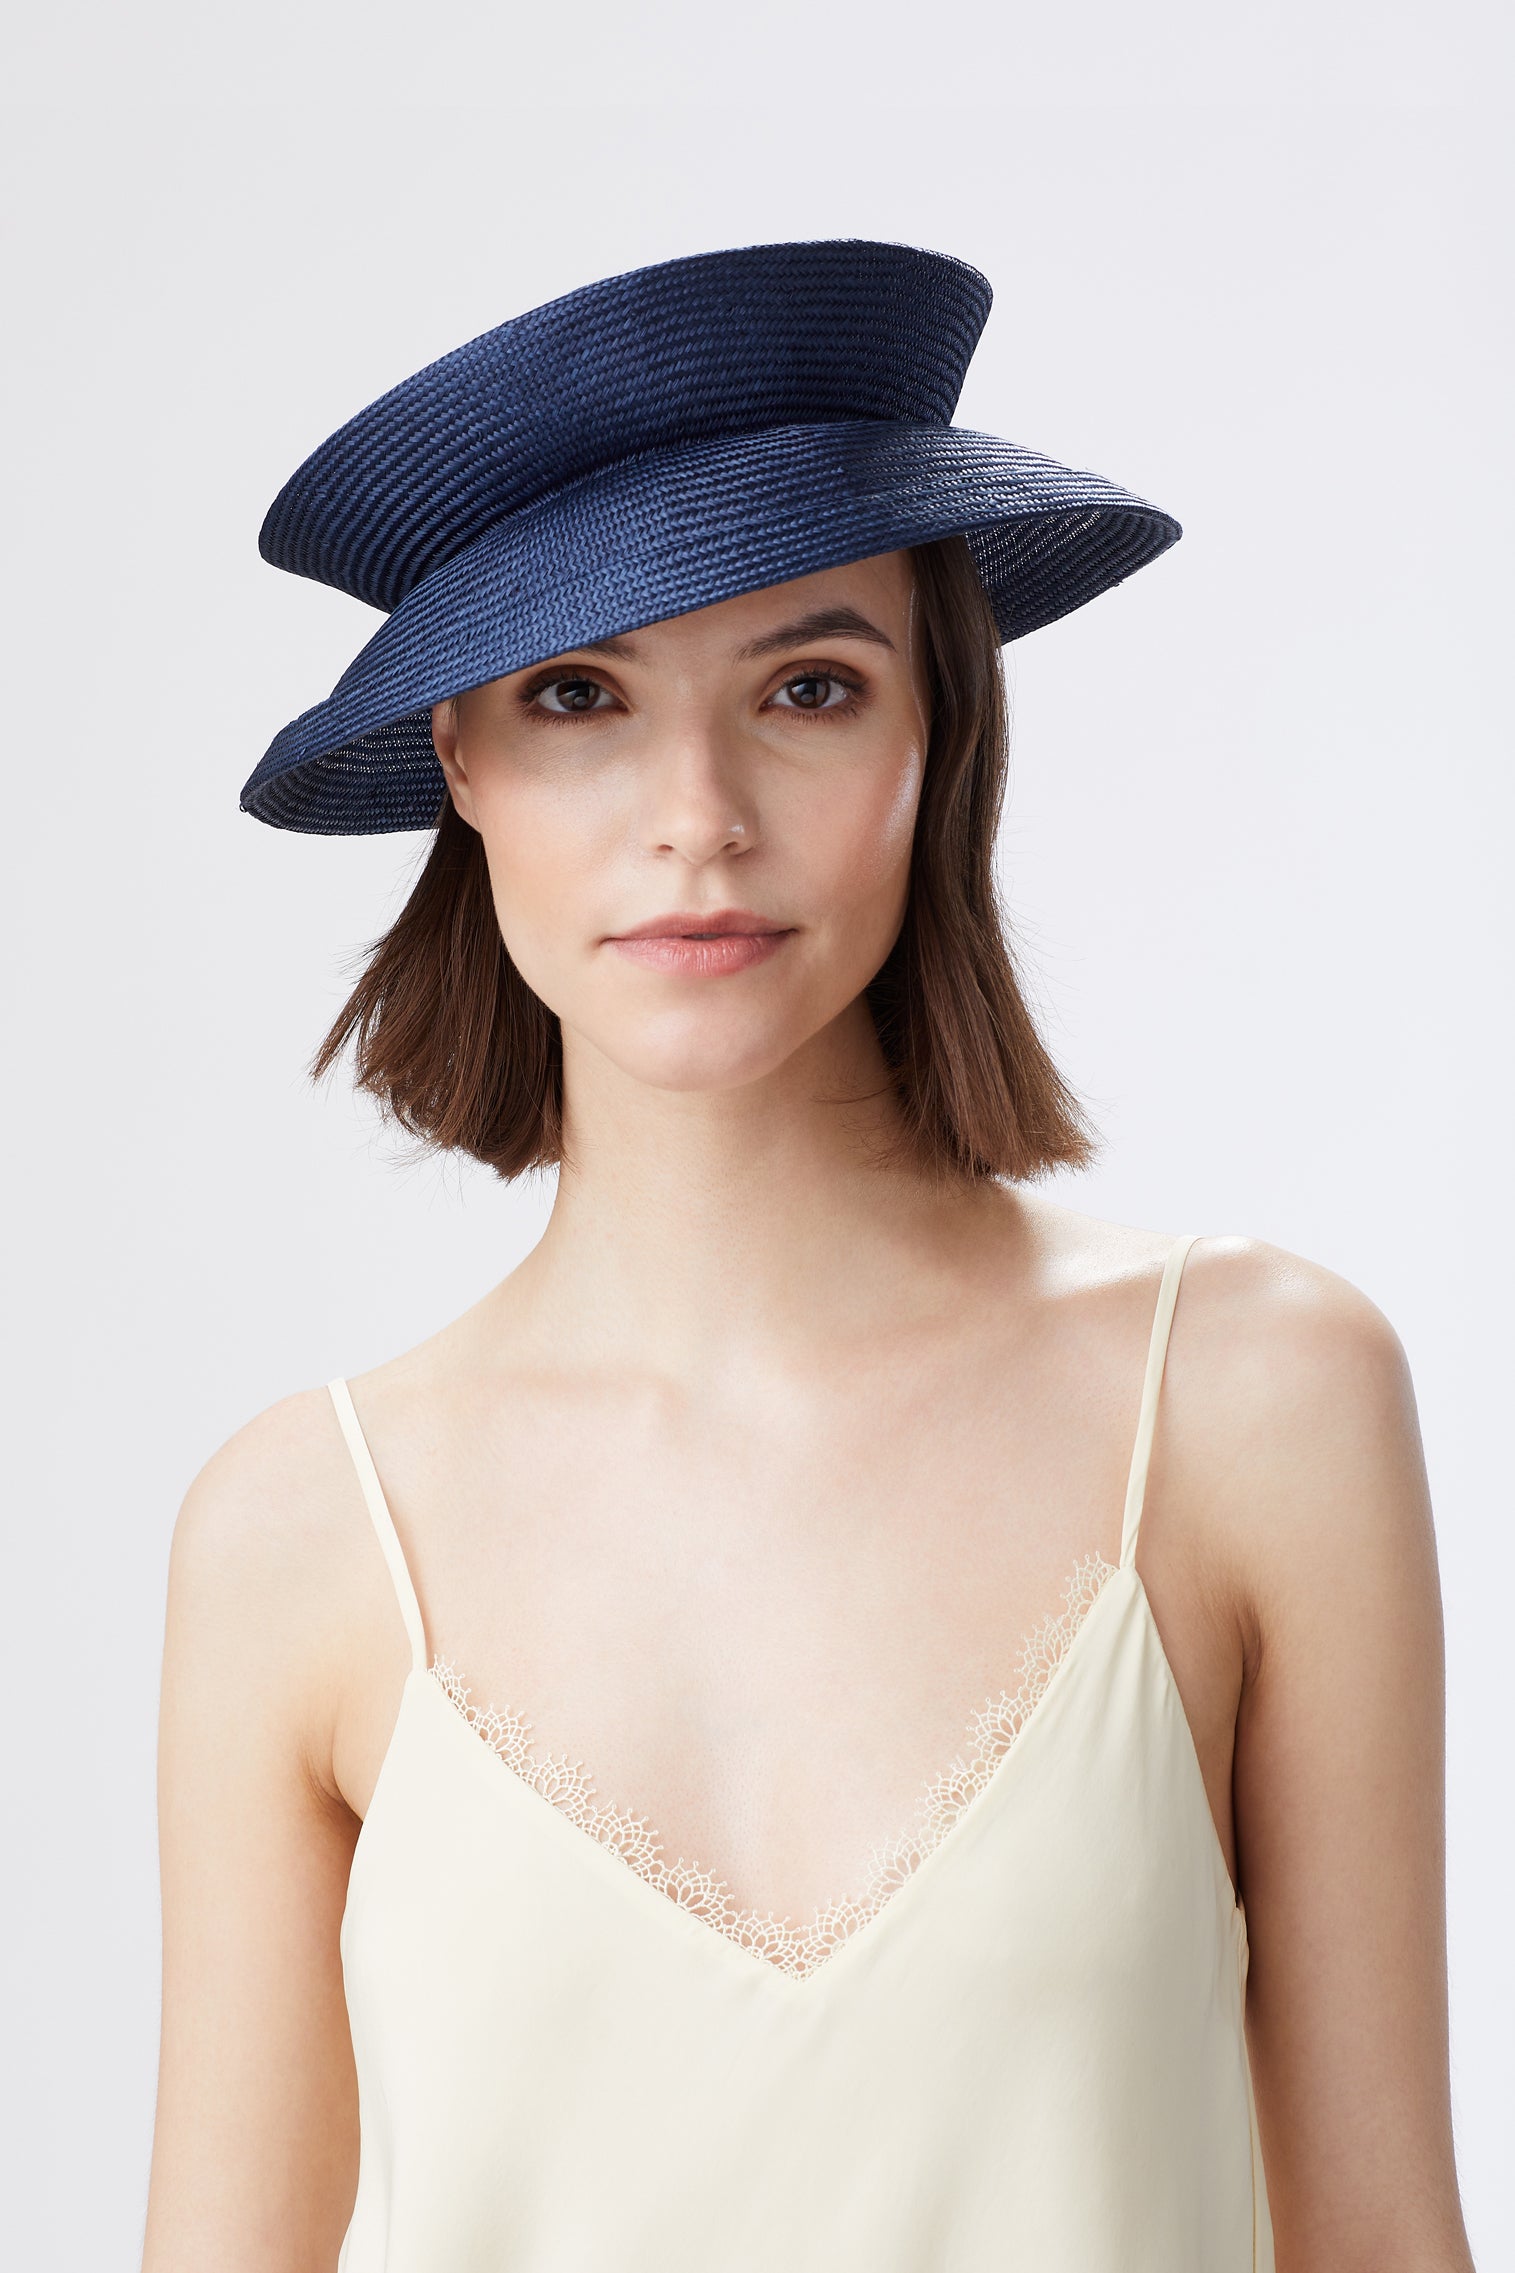 Pack'n'Go Collapsible Sun Hat - Womens Featured - Lock & Co. Hatters London UK